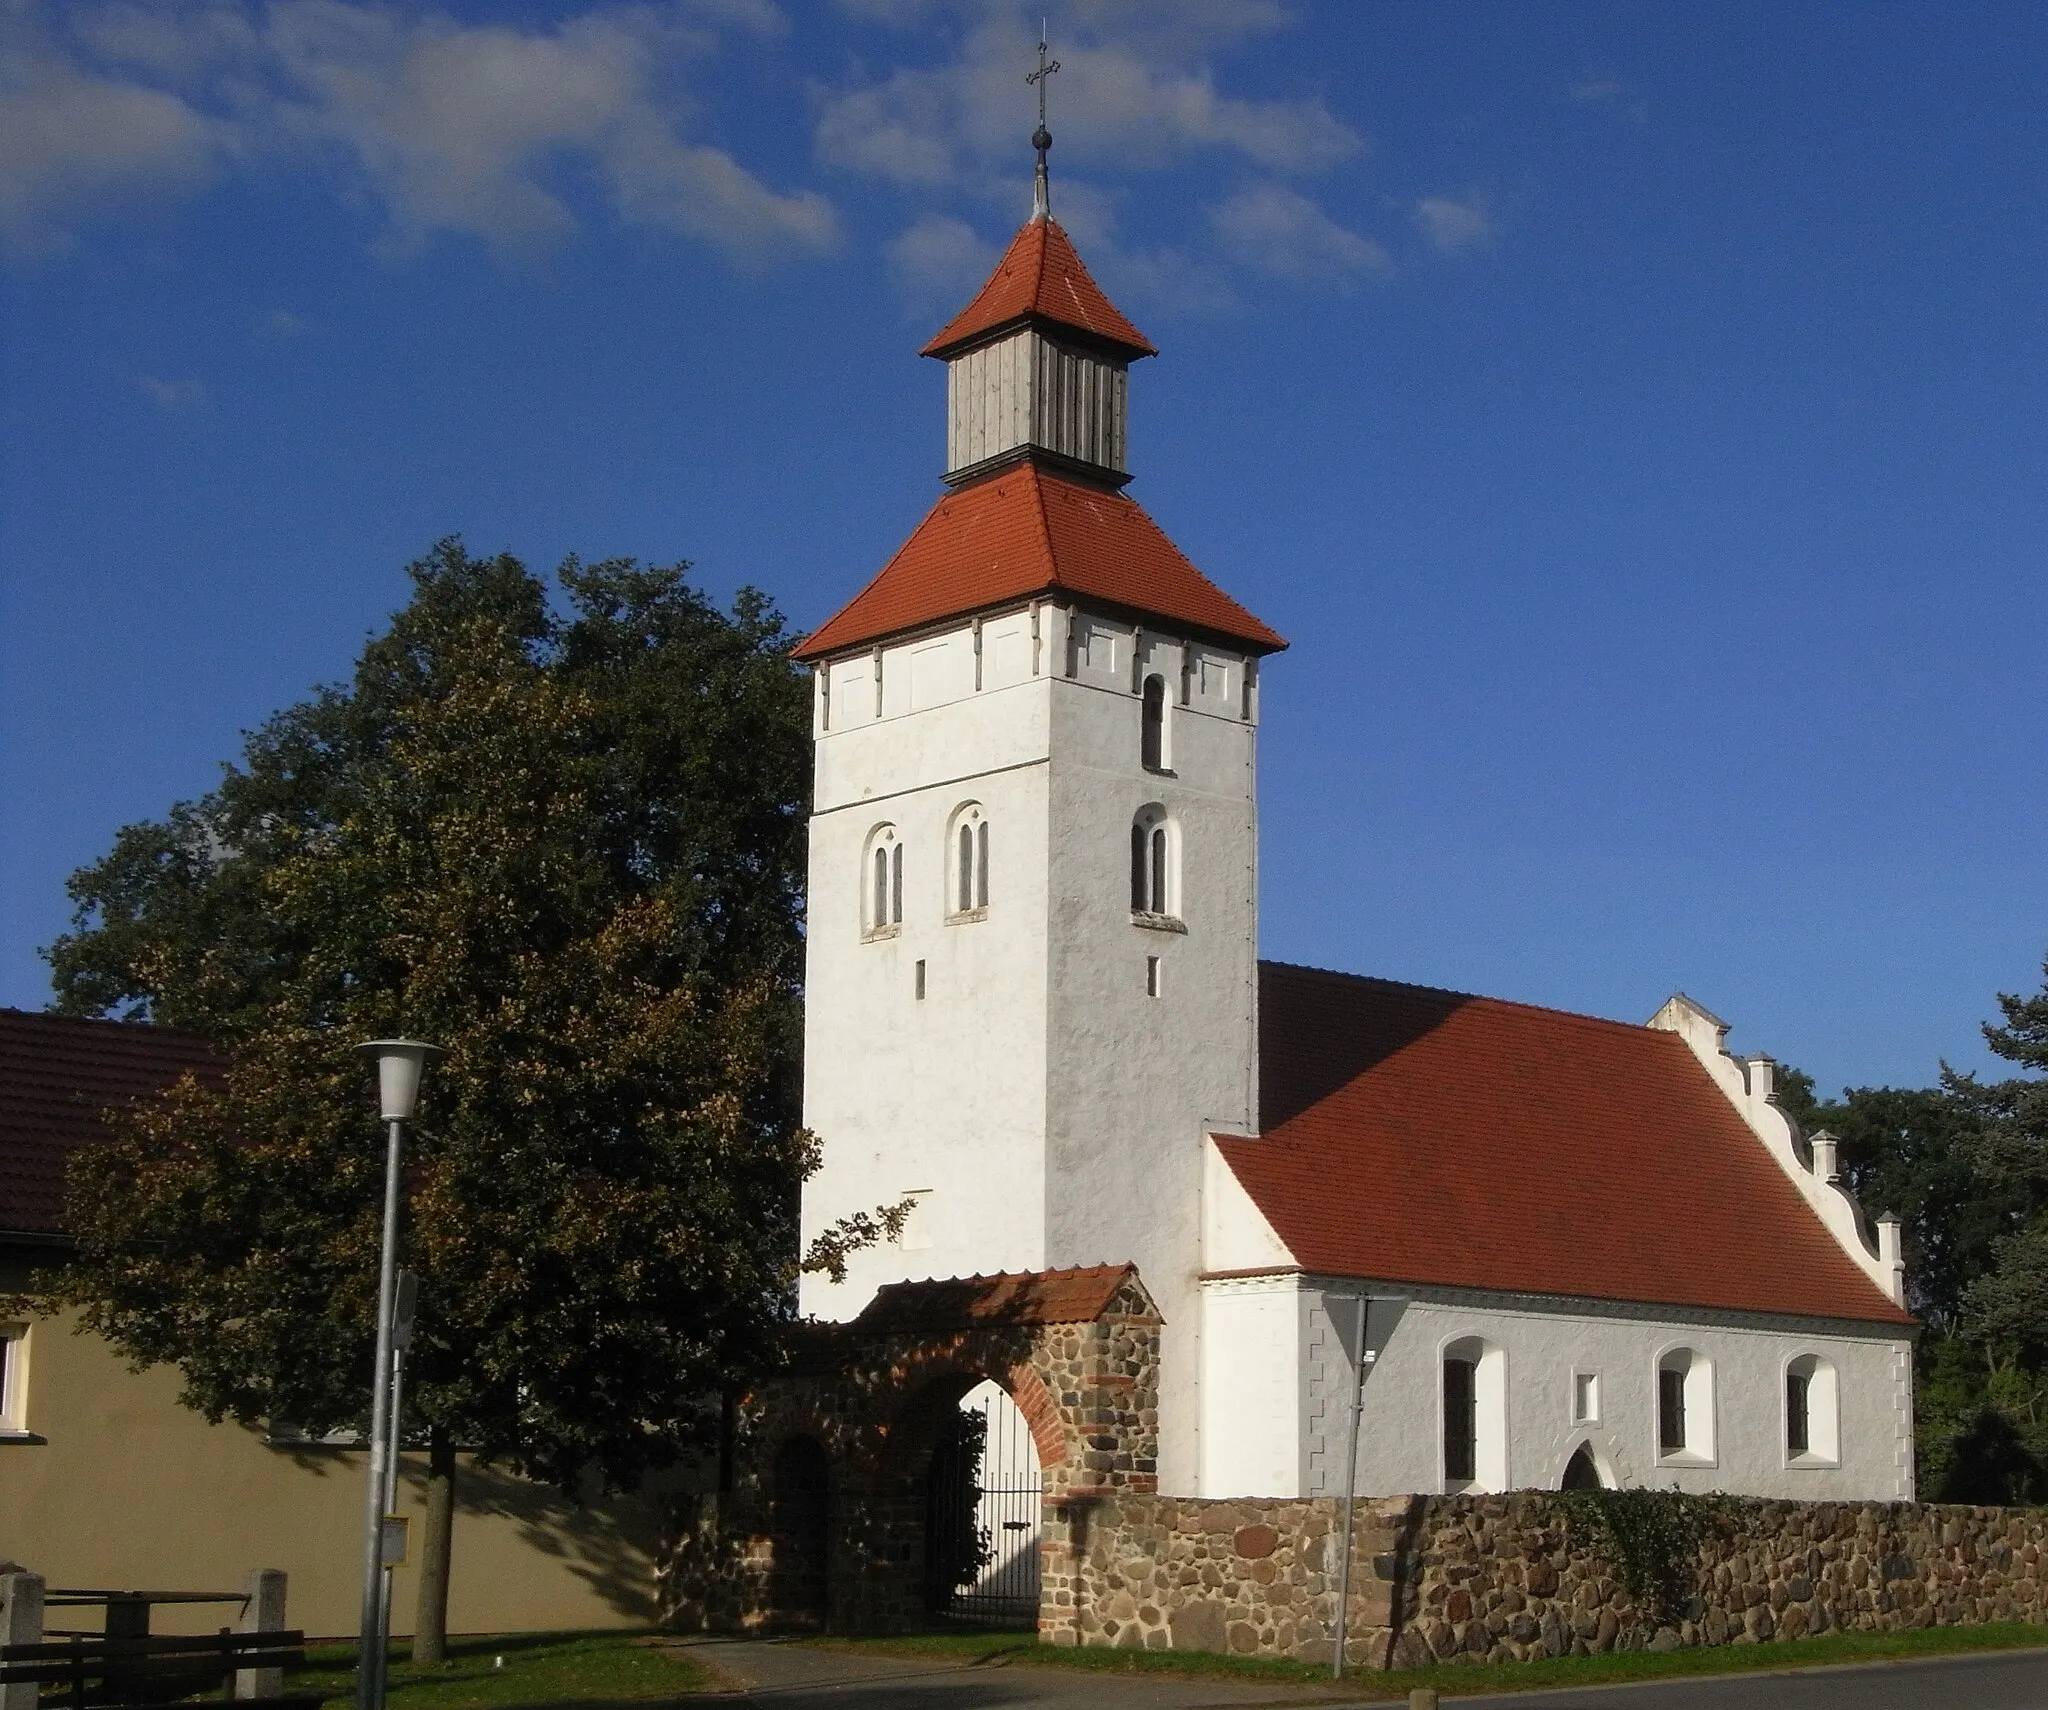 Photo showing: South-western view of church in Sonnenberg municipality, Oberhavel district, Brandenburg state, Germany